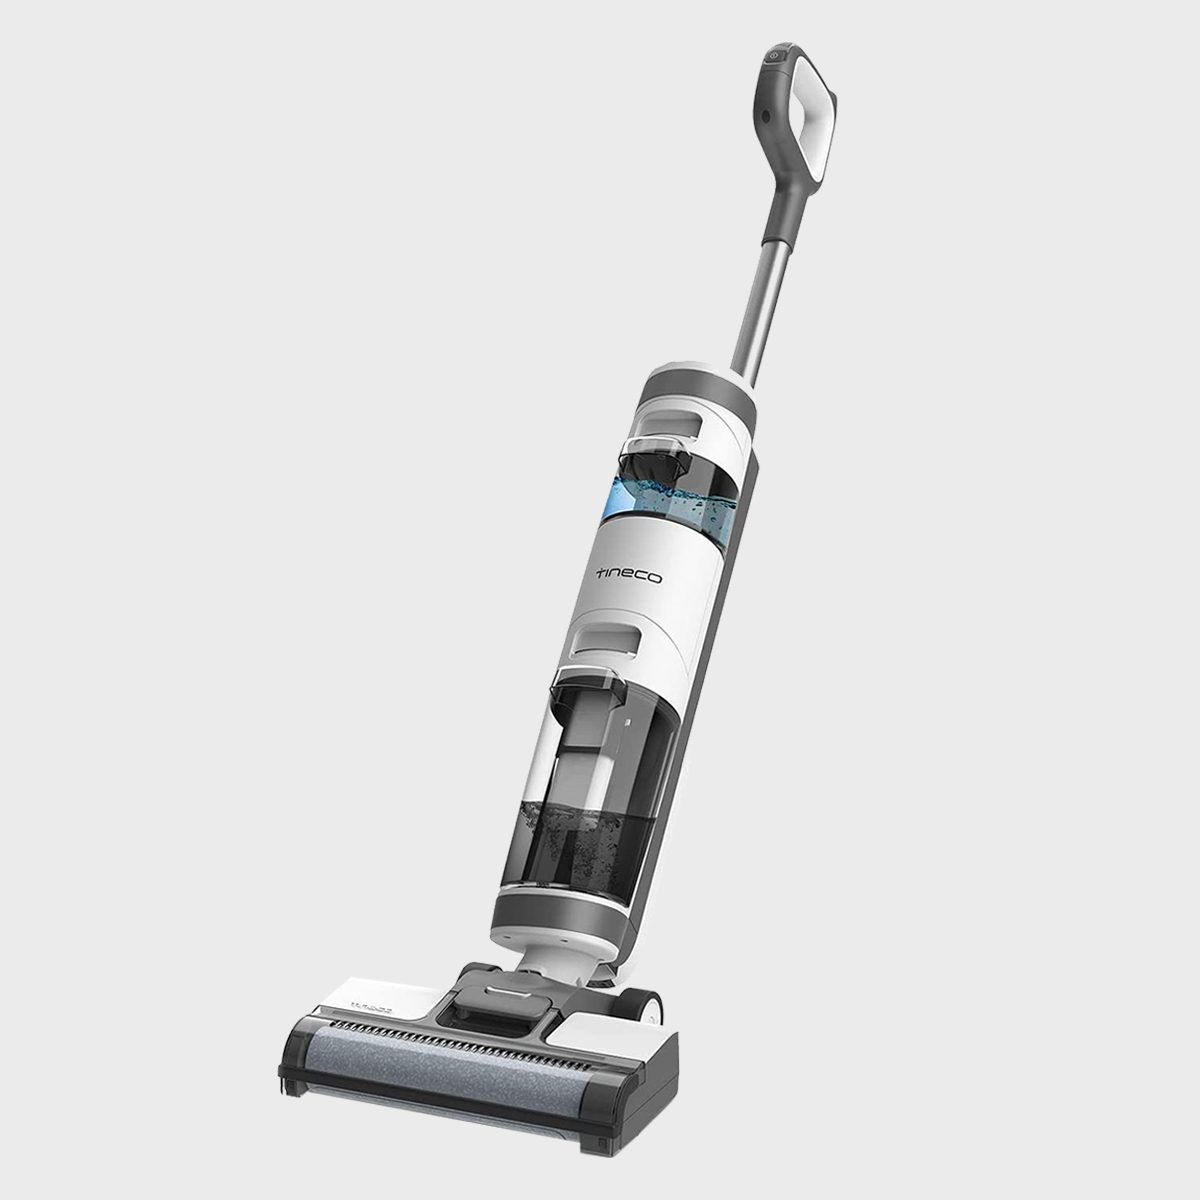 Tineco iFLOOR 3 Breeze Wet Dry Vacuum Cordless Floor Cleaner and Mop  One-Step Cleaning for Hard Floors